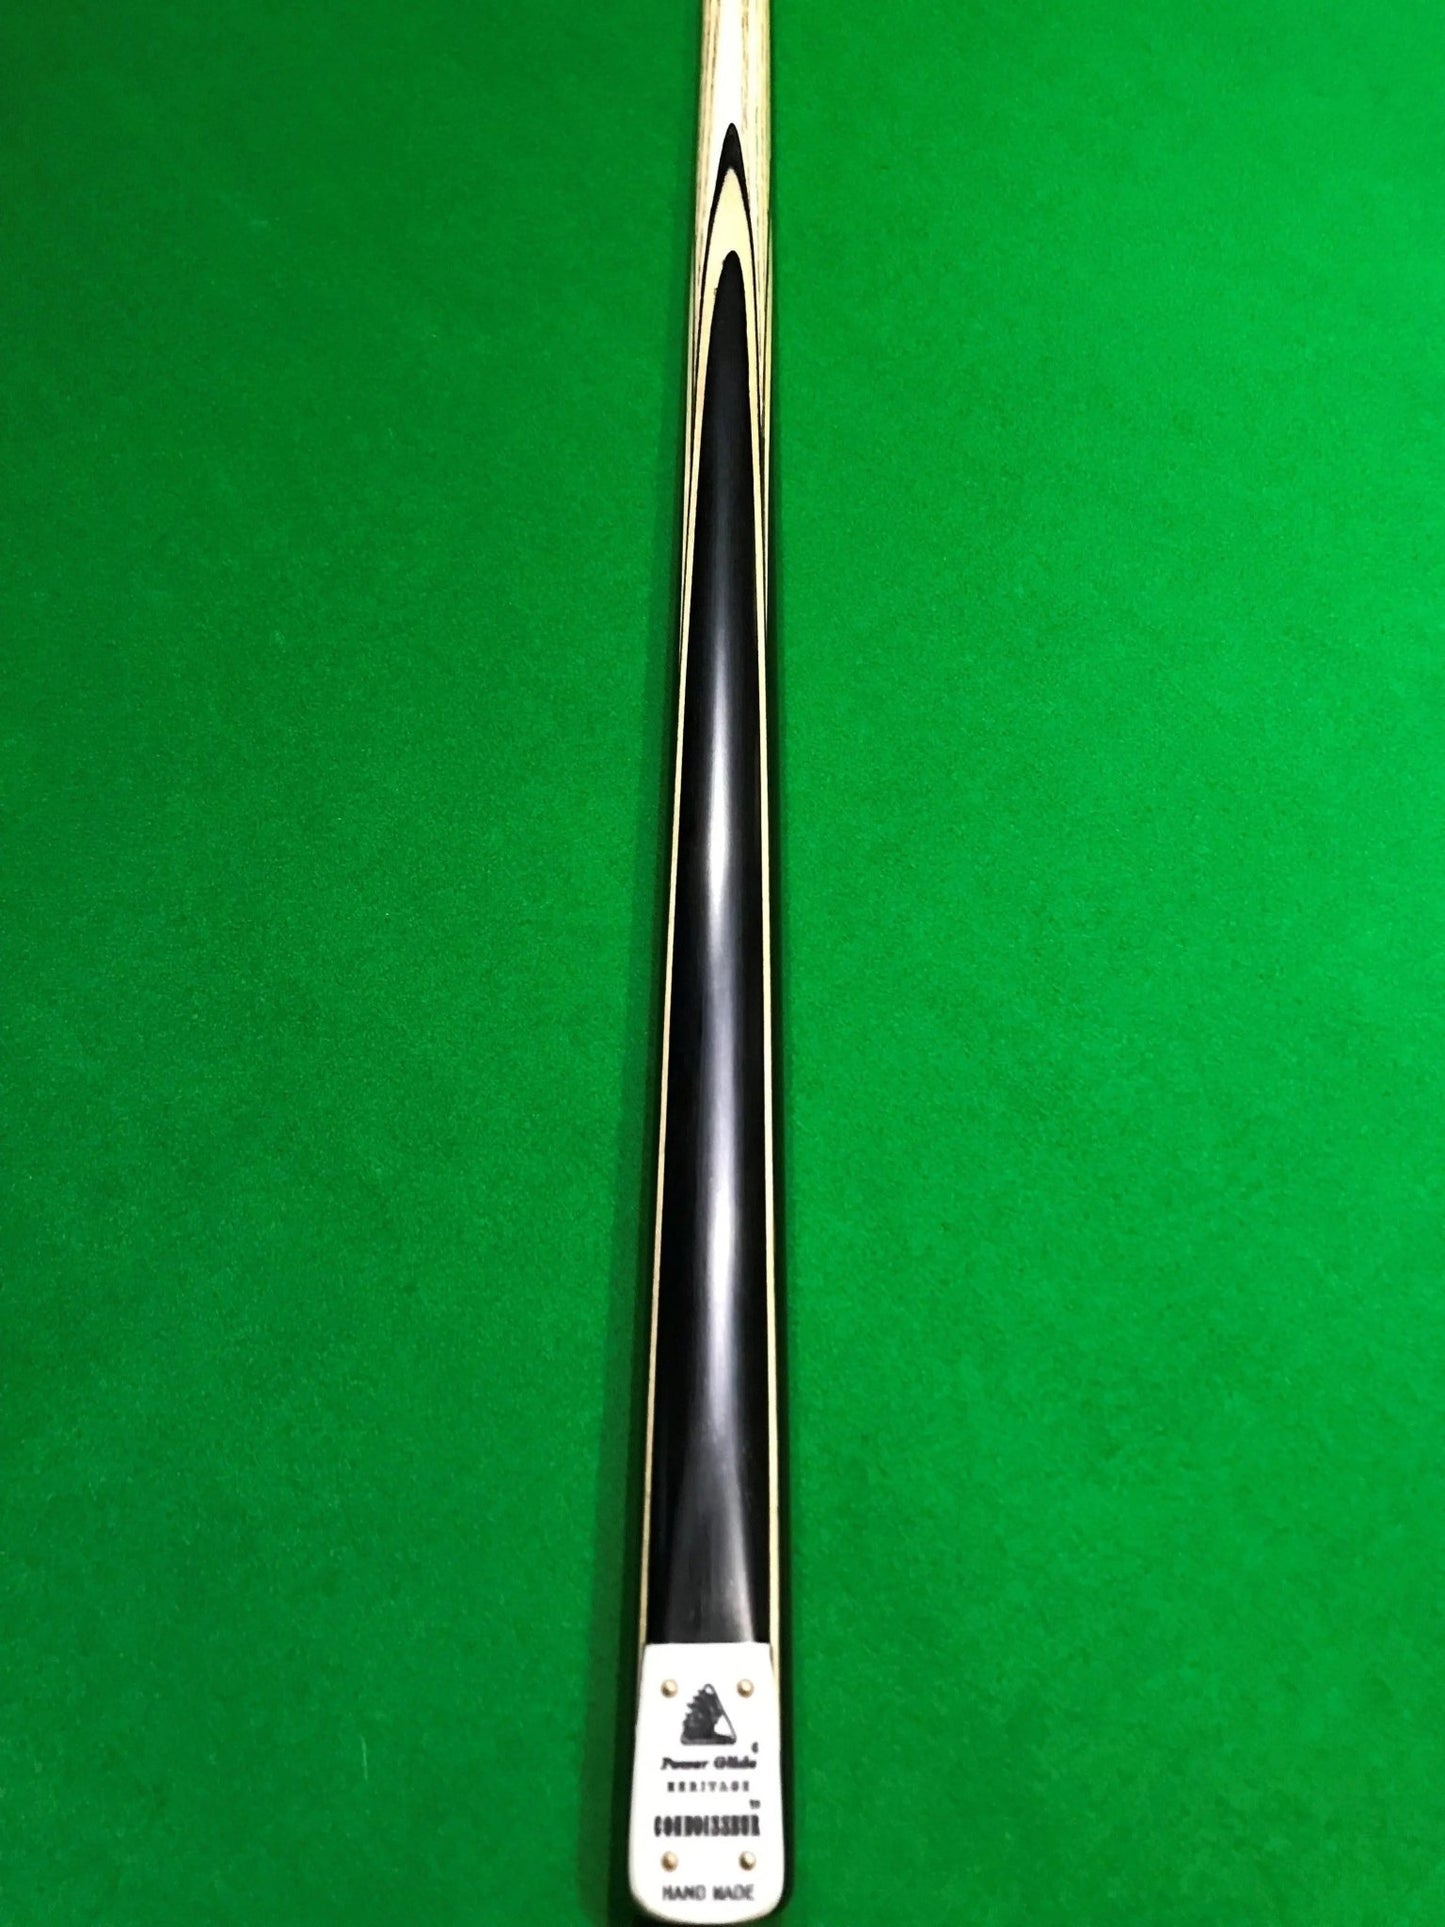 POWERGLIDE Heritage Connoisseur Hand Made 1/2 Piece Pool, Snooker & Billiard Ash Cue with Butt Extension - Q-Masters